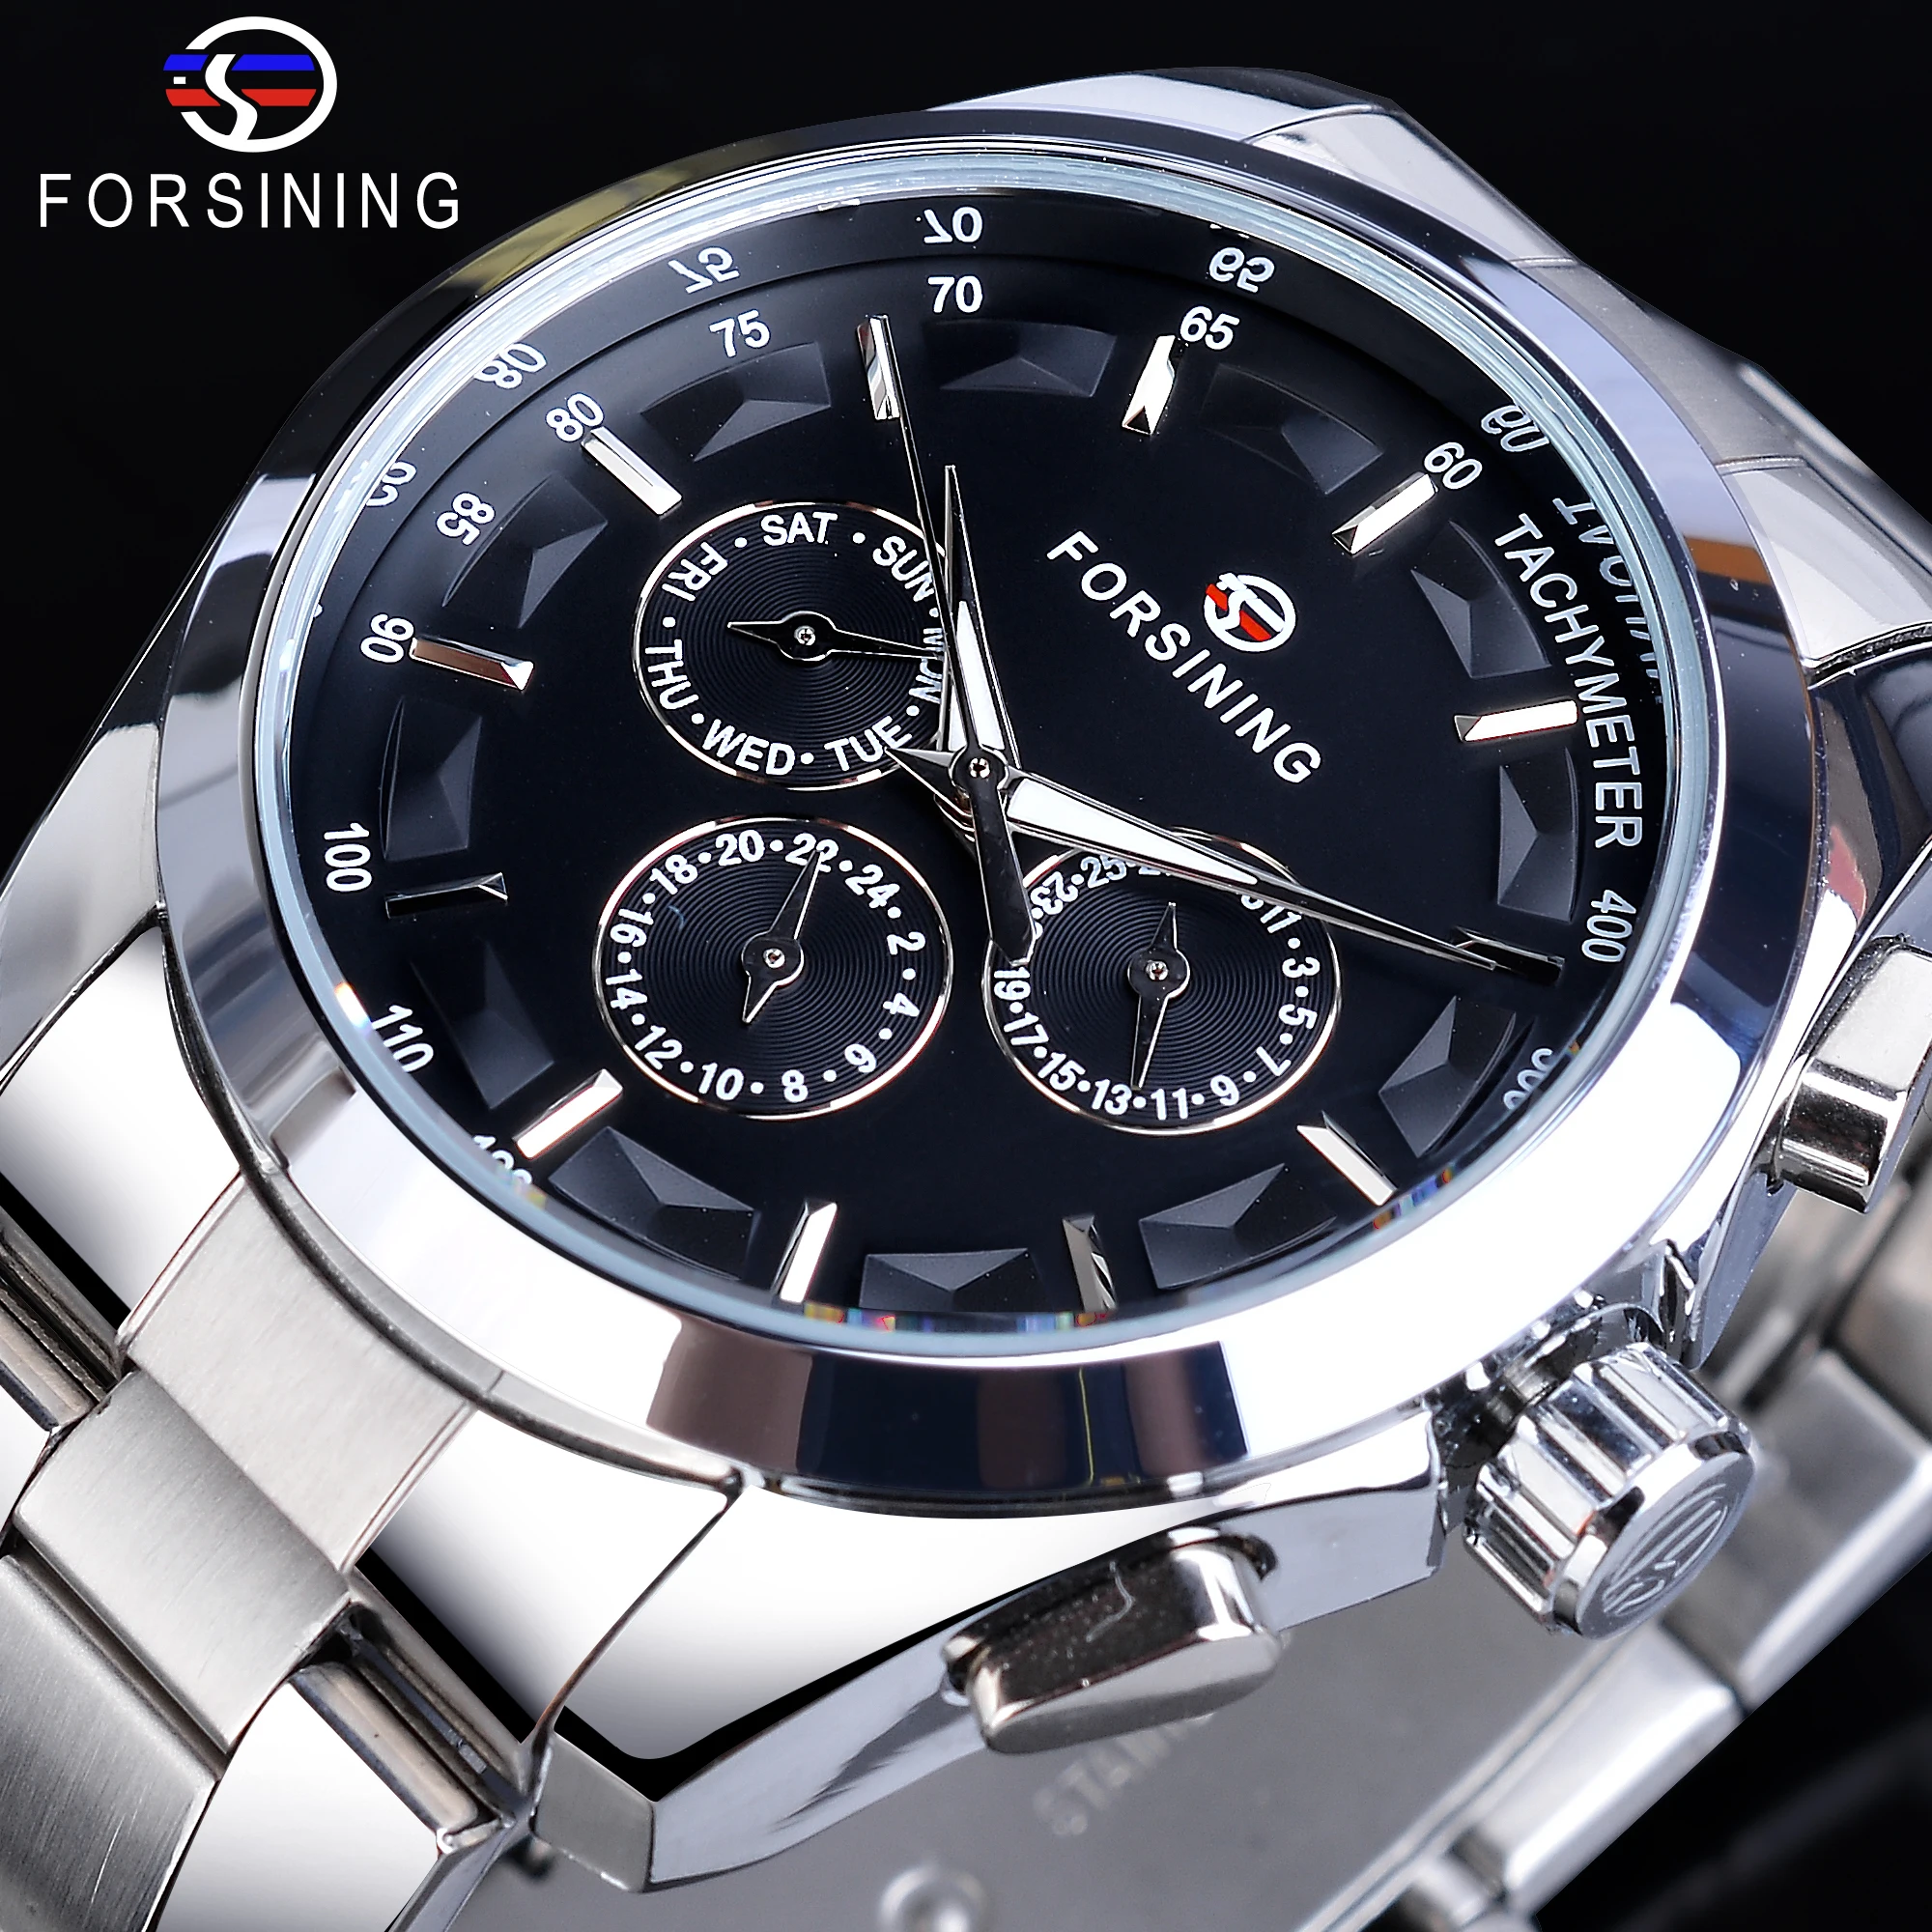 

Forsining Mens Mechanical Watches Black 6 Hands Date Automatic Self-Winding Silver Stainless Steel Band Wristwatch Clock Relogio